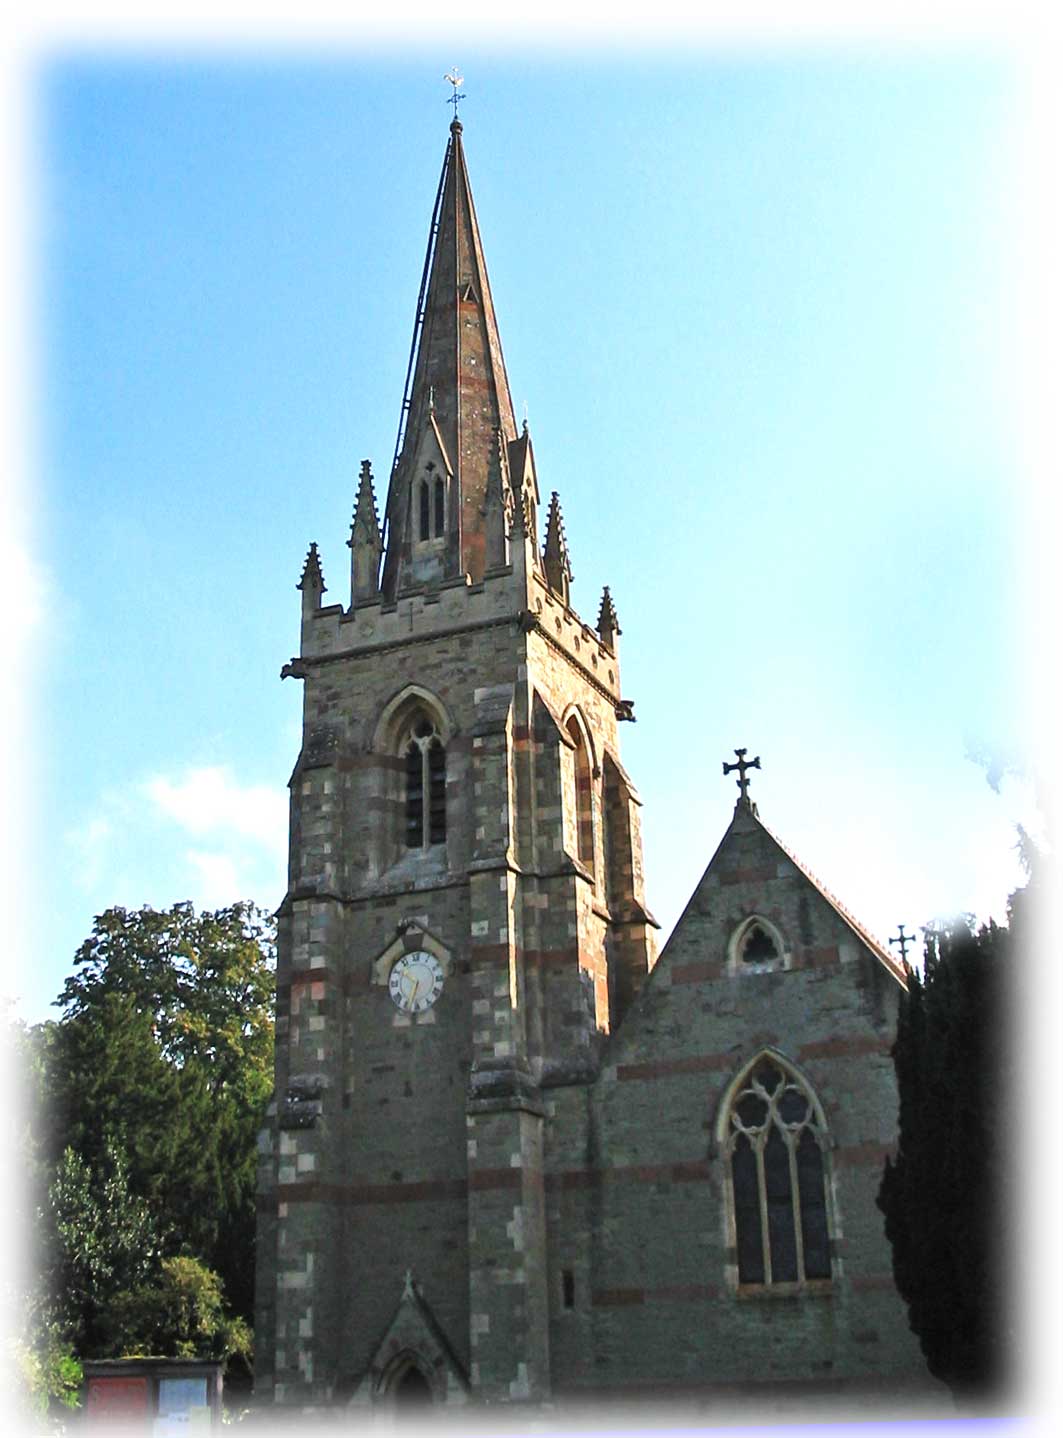 The tower of Madresfield church